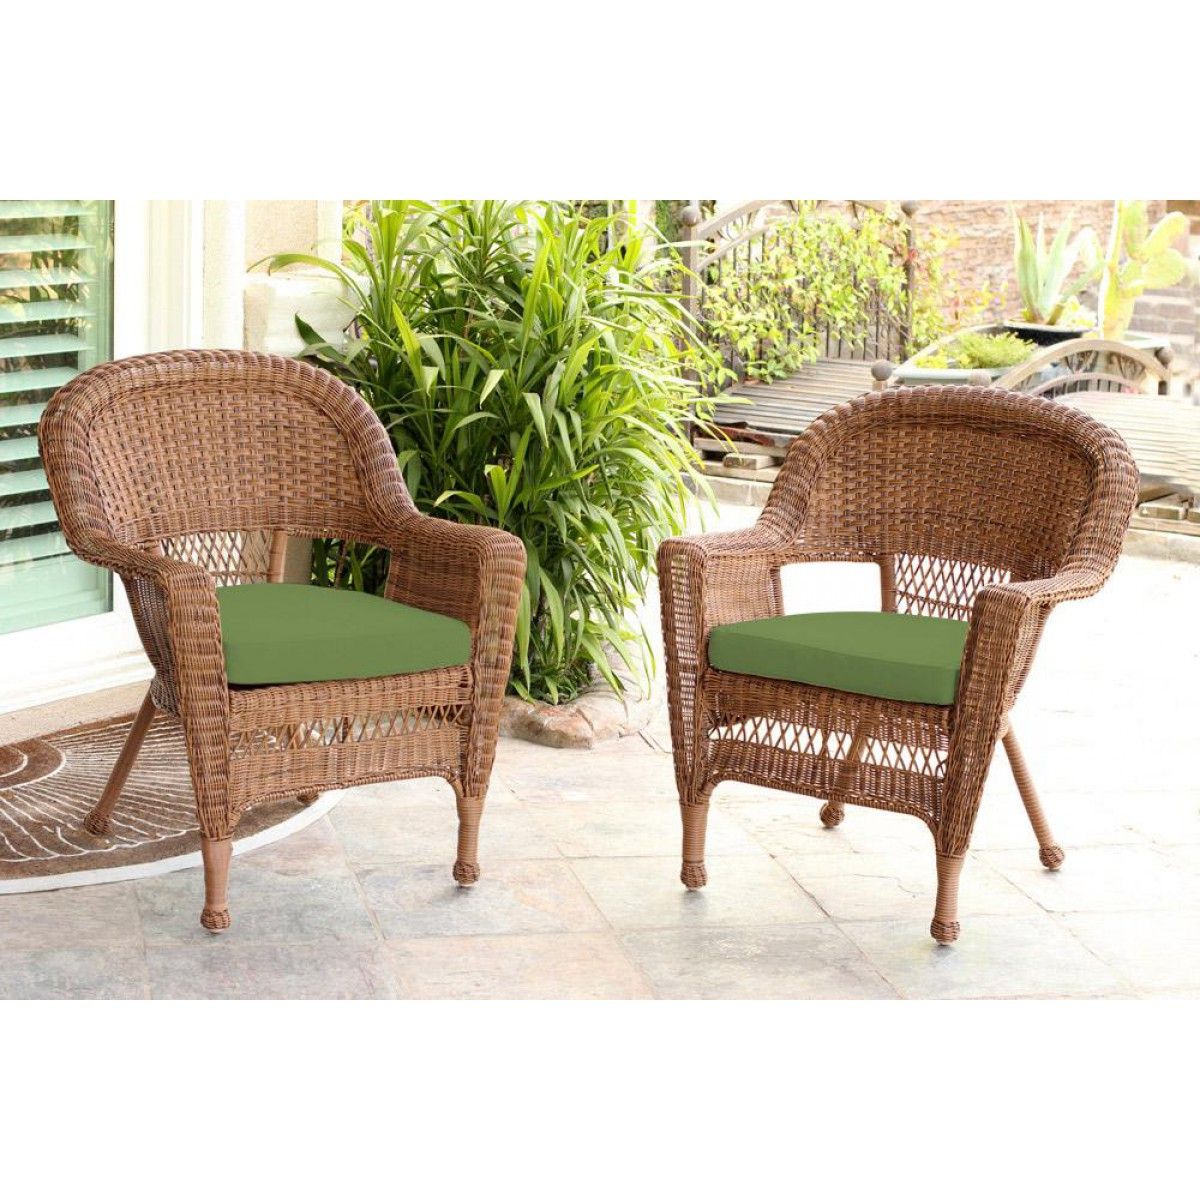 Green Rattan Outdoor Rocking Chair Sets For Most Up To Date Honey Wicker Chair With Hunter Green Cushion – Set Of  (View 3 of 15)